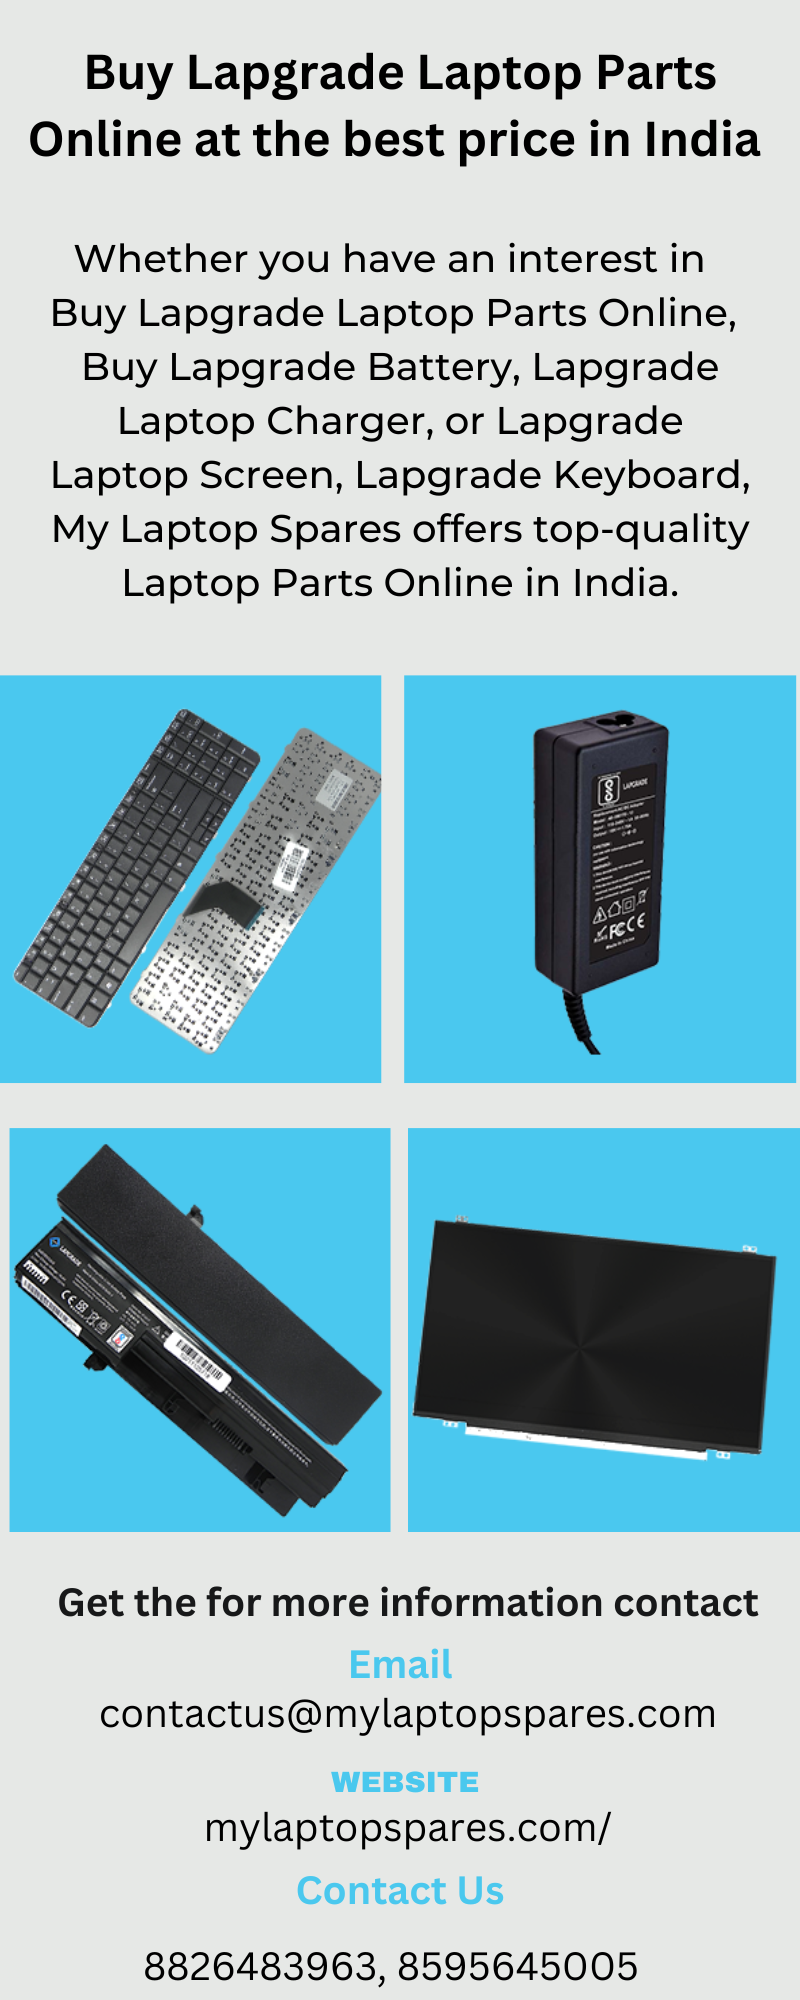 Buy Lapgrade Laptop Parts Online at the best price in India.png | Pearltrees